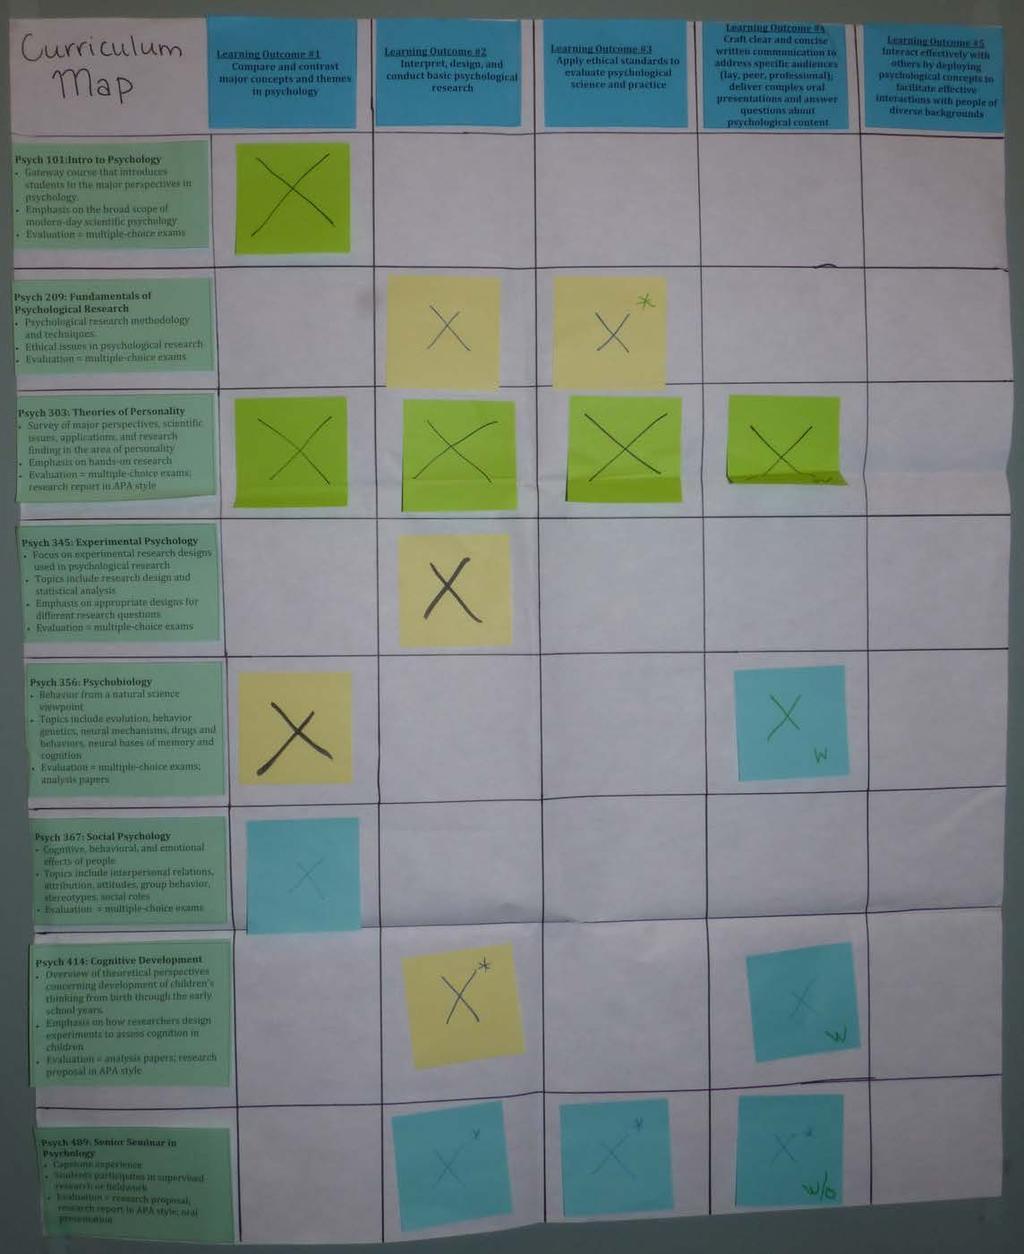 Photo of the completed curriculum map after the initial part of the role-playing activity.